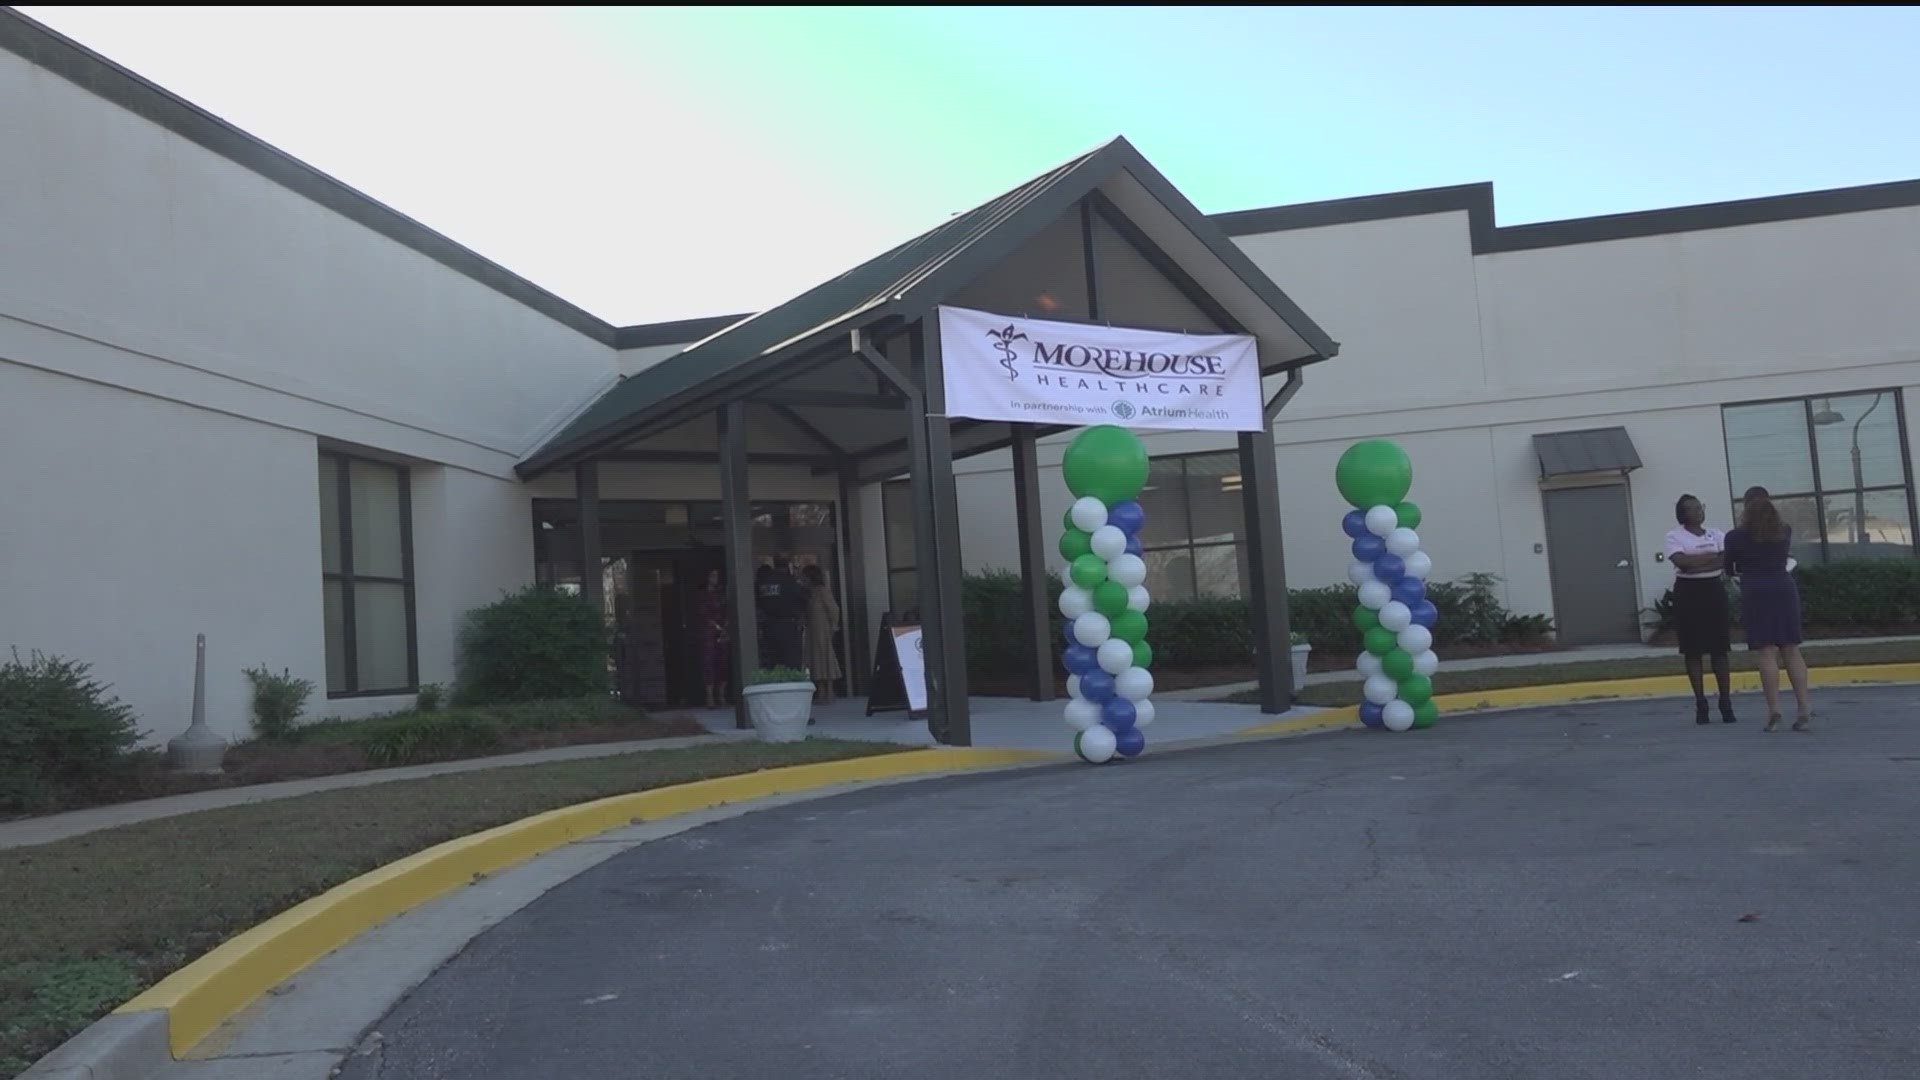 The clinic comes after Wellstar Atlanta Medical Center shut down in November and Wellstar East Point closed its emergency department last year.